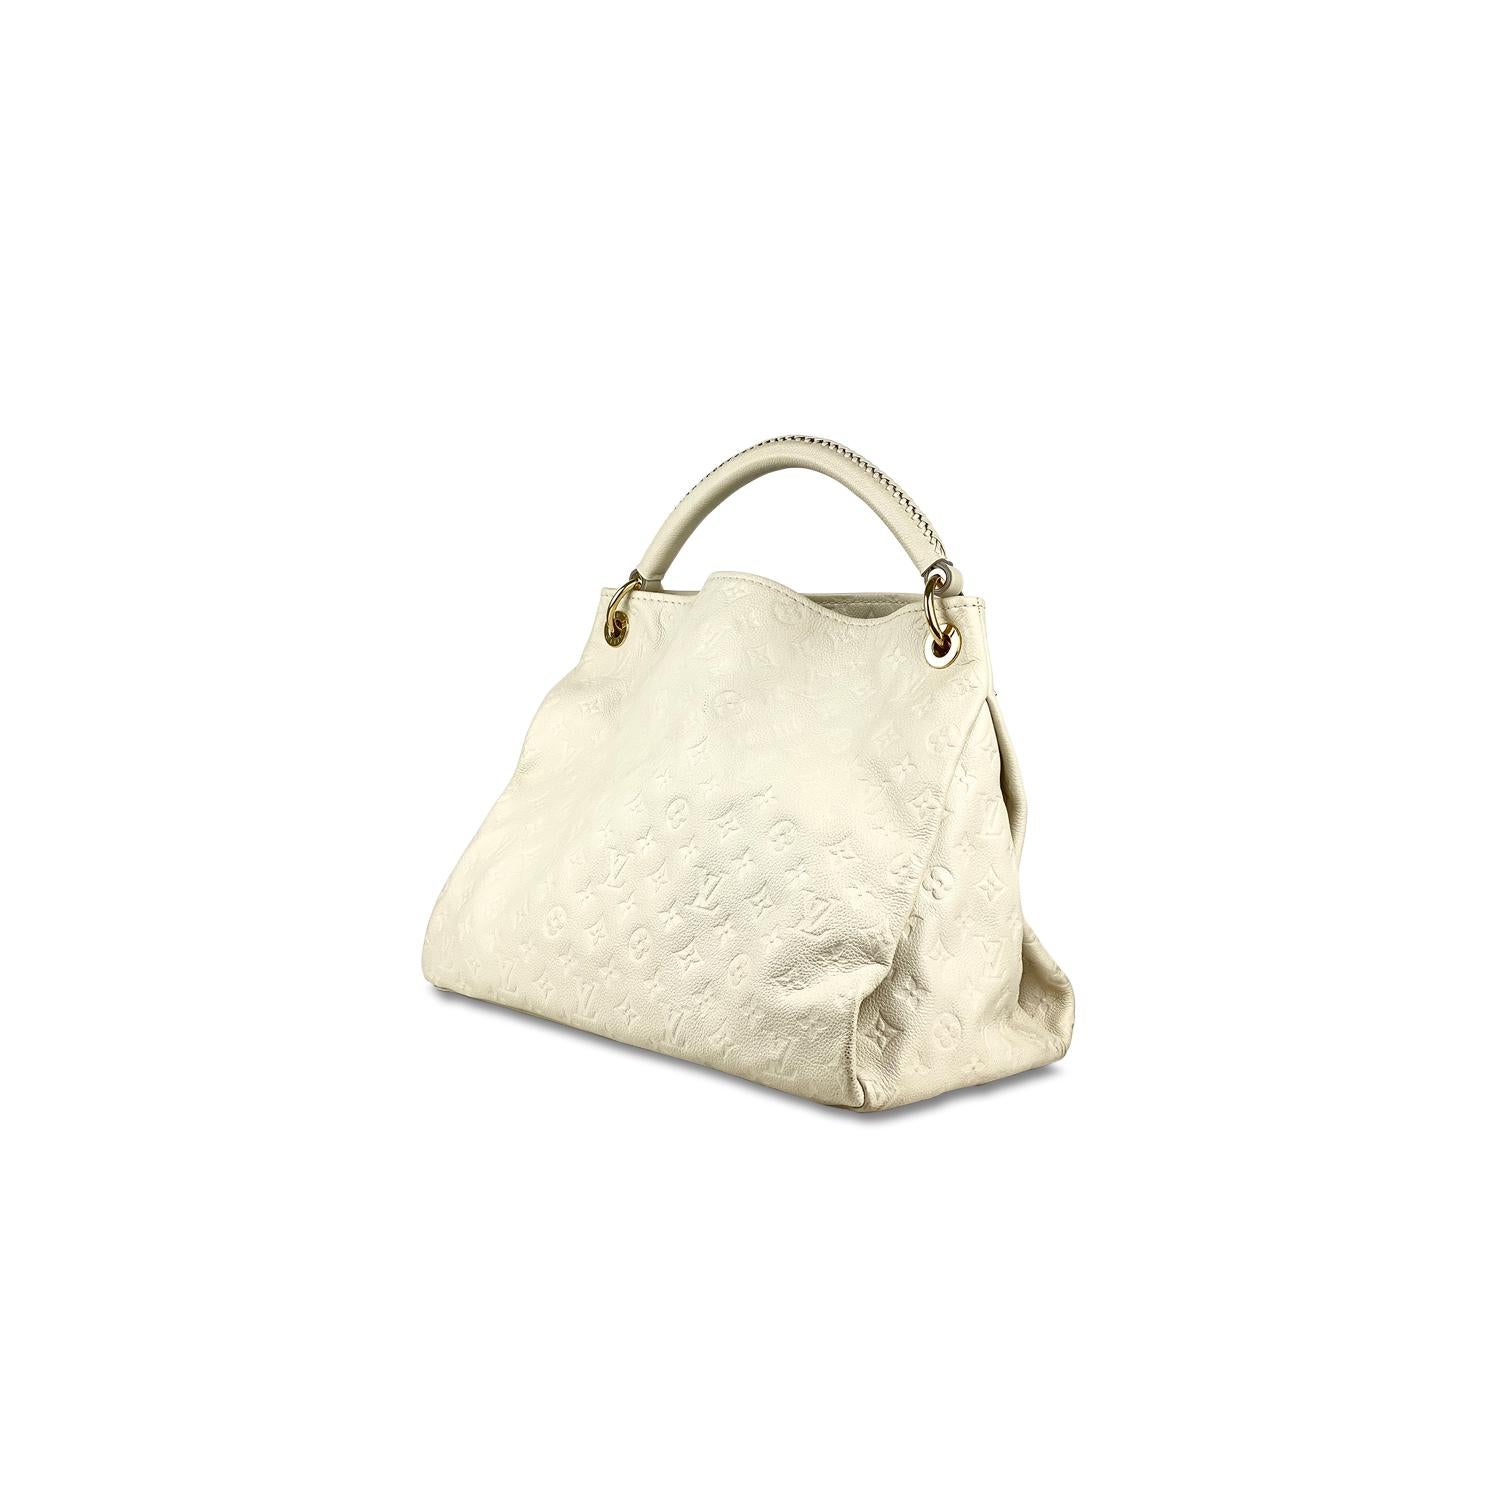 Neige Monogram Empreinte leather Louis Vuitton Artsy MM with

- Brass hardware
- Single rolled top handle
- Protective feet at base
- Ivory and black stripe canvas lining
- Seven interior pockets; one with zip closure and open top

Overall Preloved